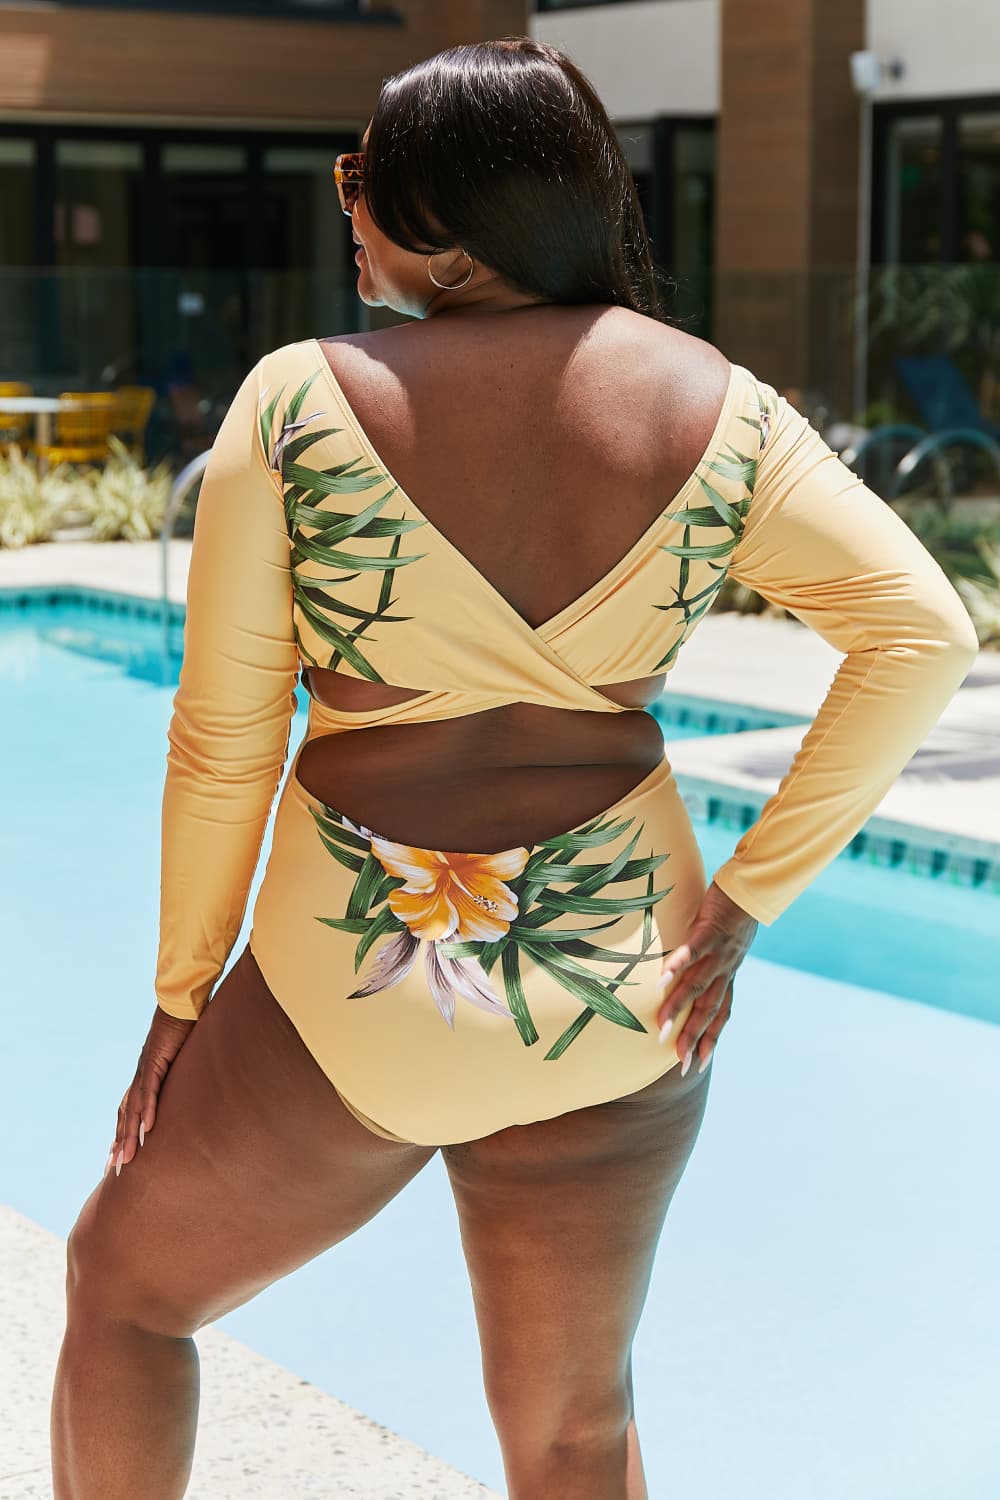 Long Sleeve Swimsuit in Yellow